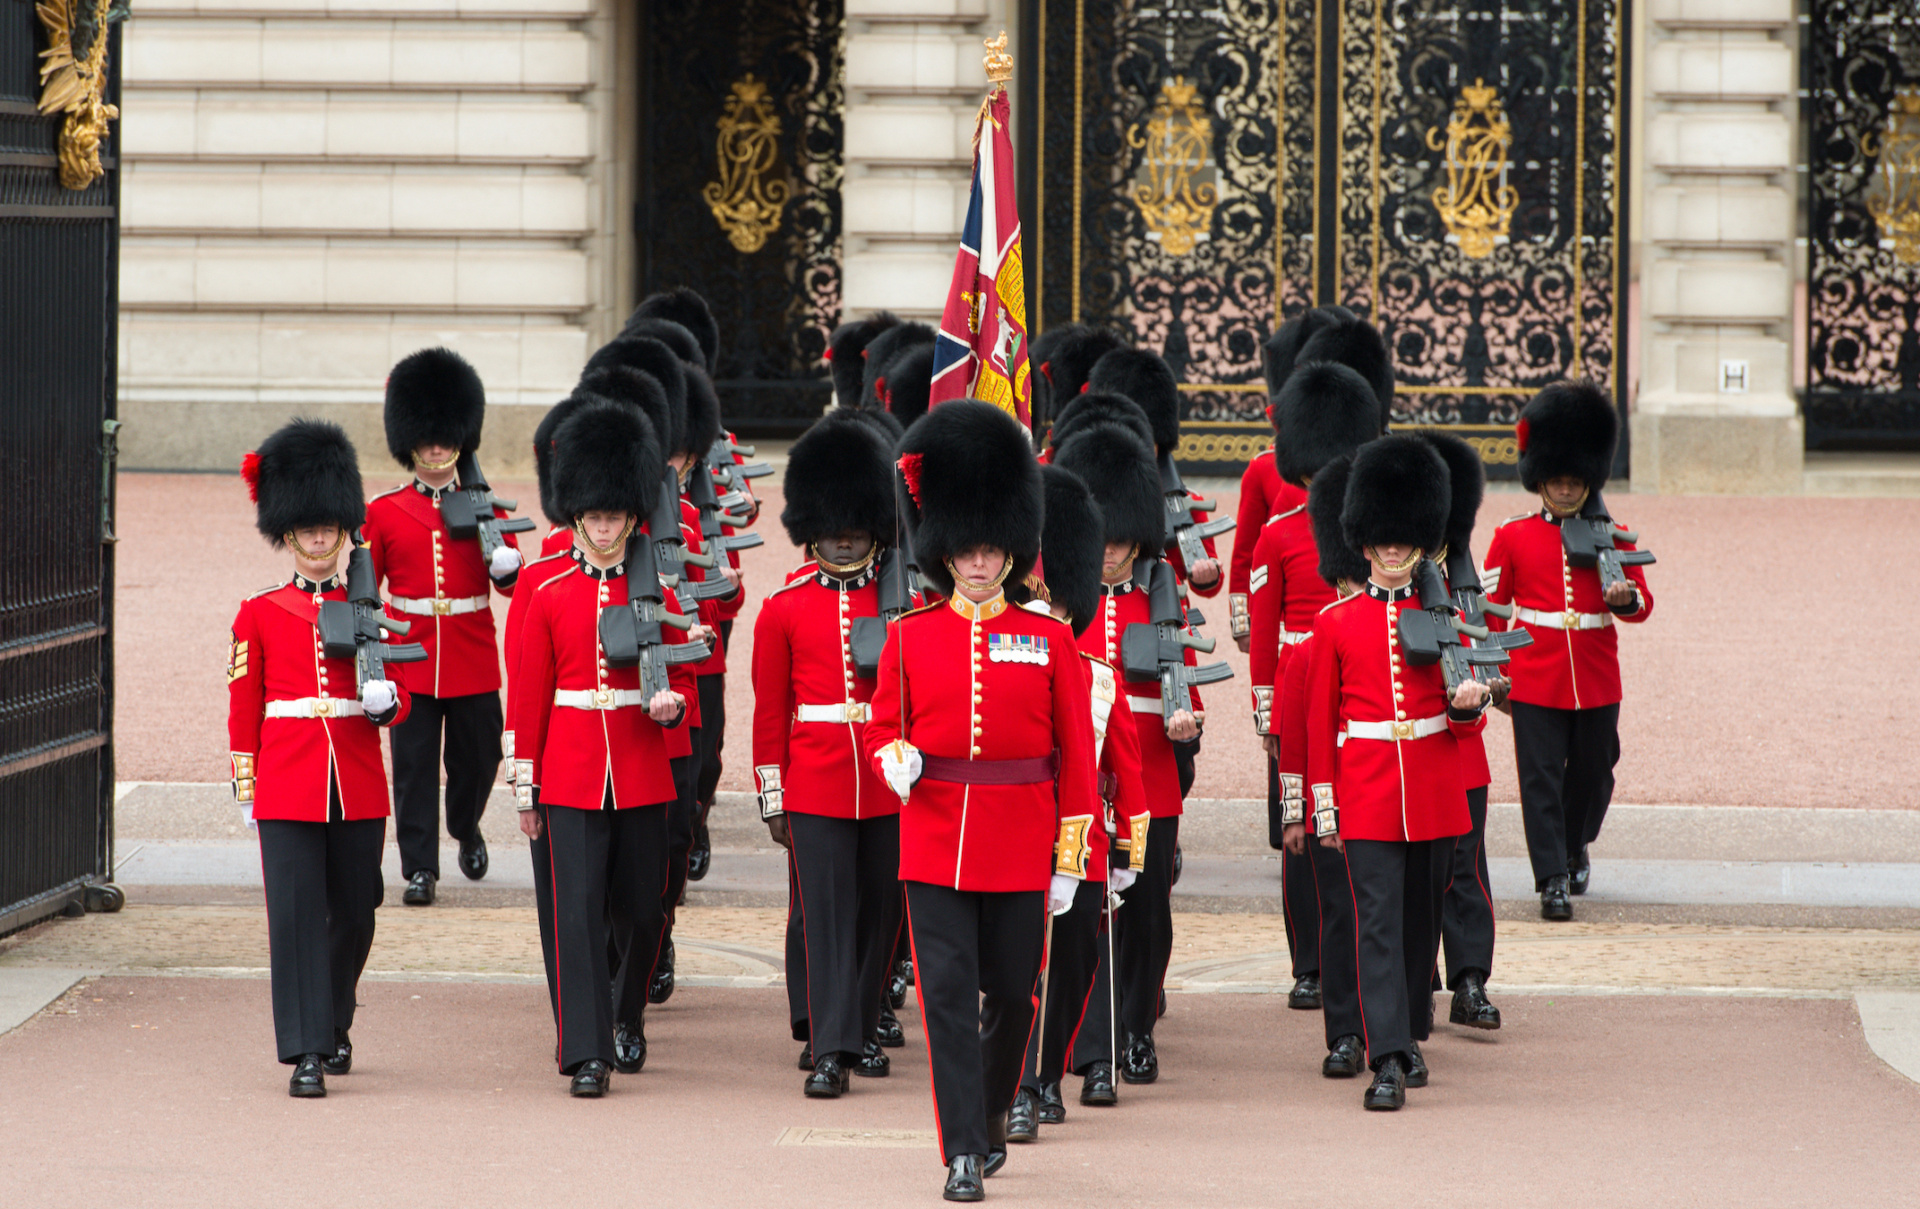 travel to london, weekend getaway to london, travel to uk, what to do in London, what to do in UK, Weekend getaway in London-Buckingham Palace, Changing of the Guard-Erin Busbee-Busbee Style-Beauty Over 40